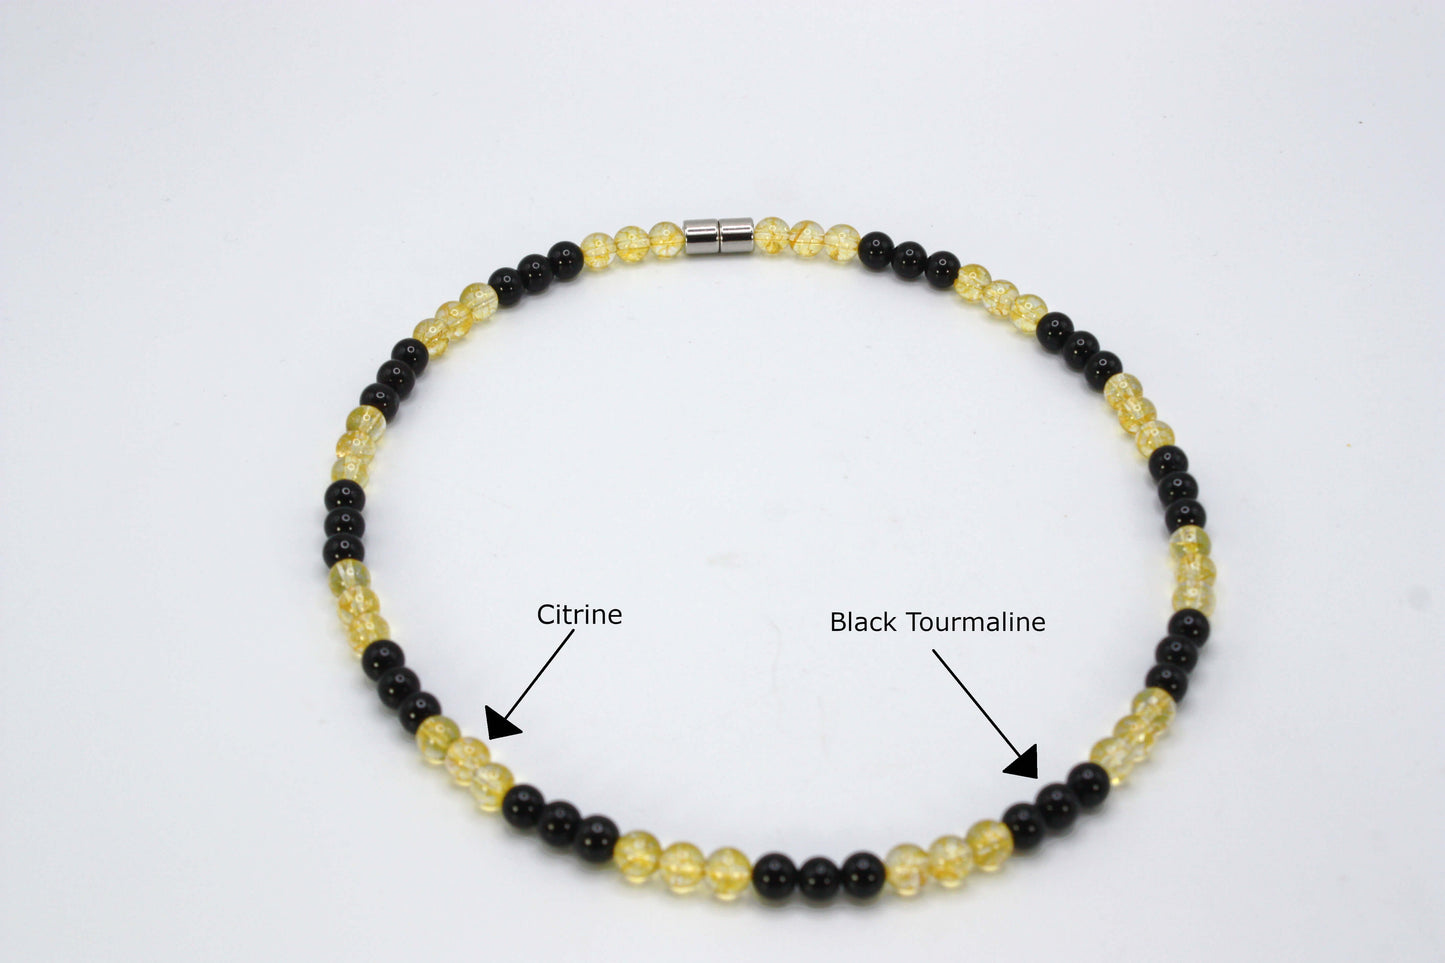 Black Tourmaline and Citrine Necklace - Gifts for Man/Woman - Protection and Prosperity Necklace - 6mm Beaded Necklace